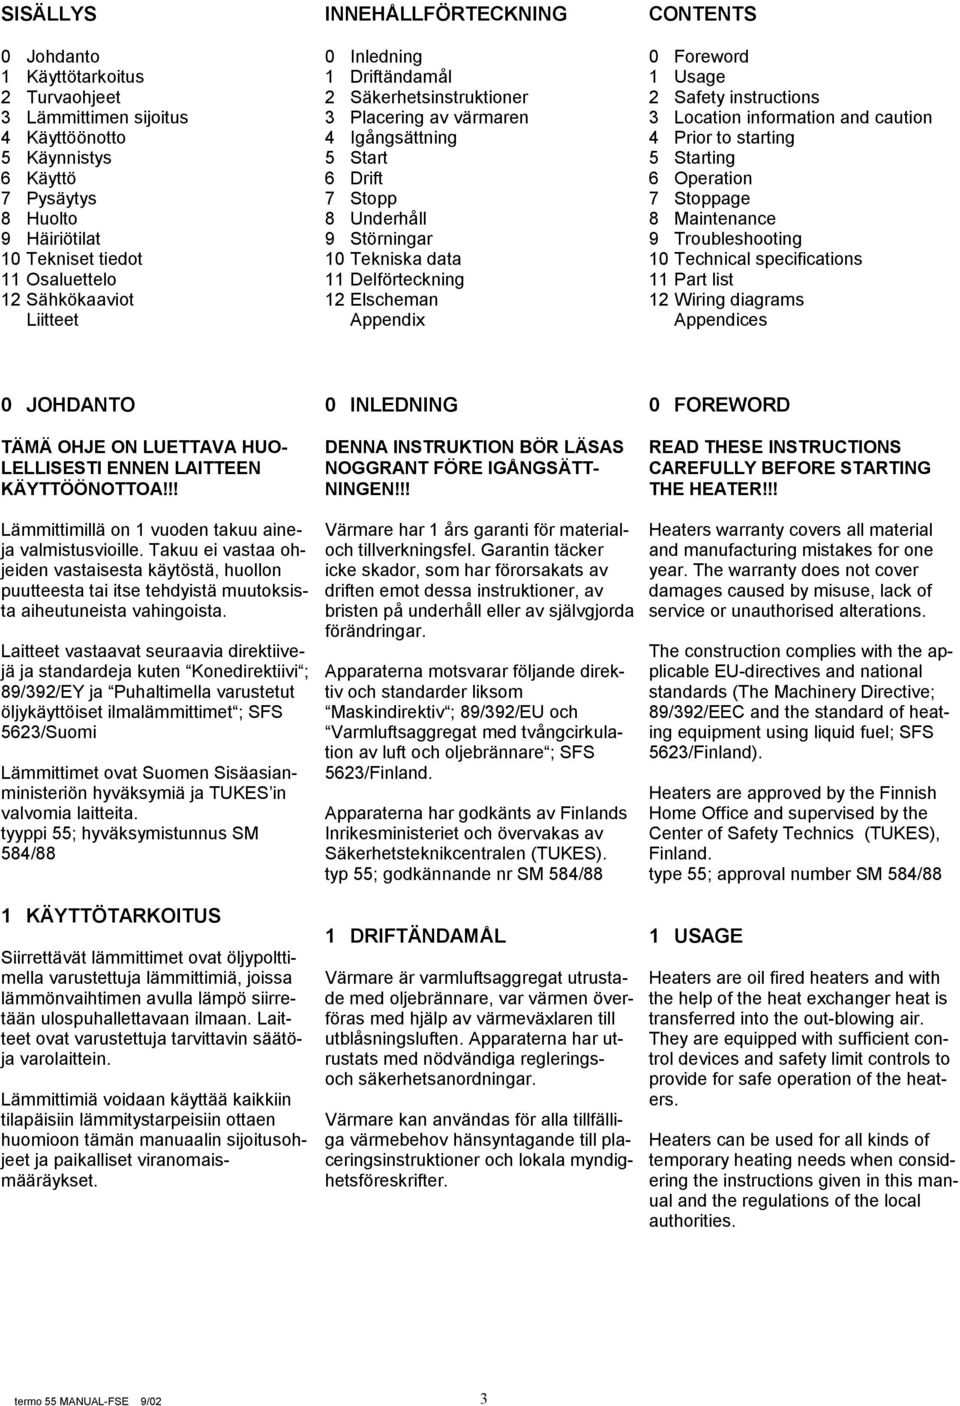 Delförteckning 12 Elscheman Appendix CONTENTS 0 Foreword 1 Usage 2 Safety instructions 3 Location information and caution 4 Prior to starting 5 Starting 6 Operation 7 Stoppage 8 Maintenance 9